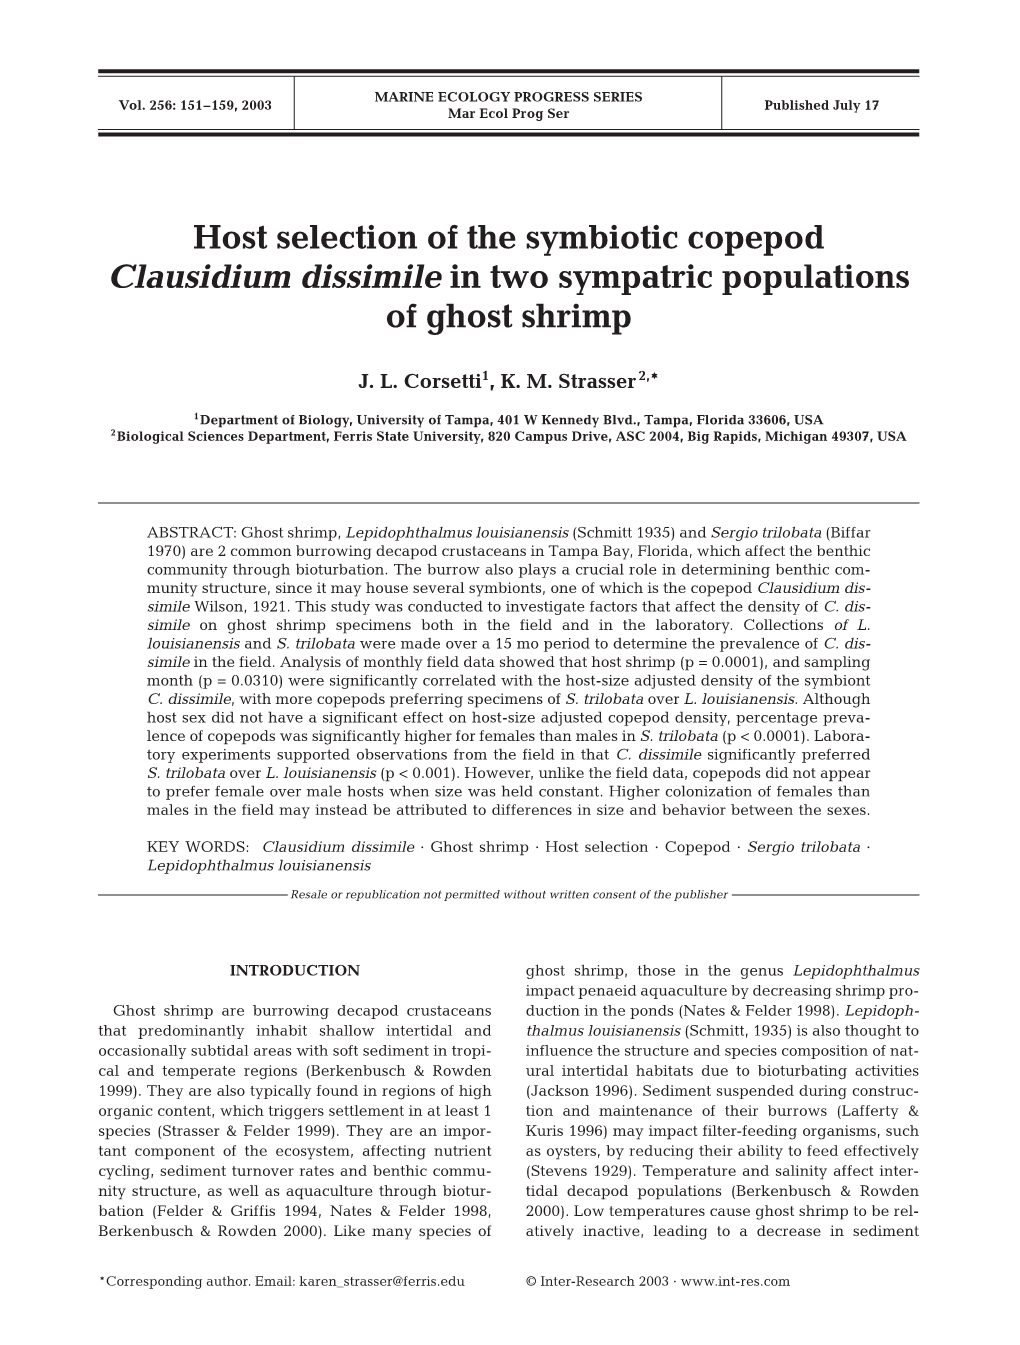 Host Selection of the Symbiotic Copepod Clausidium Dissimile in Two Sympatric Populations of Ghost Shrimp